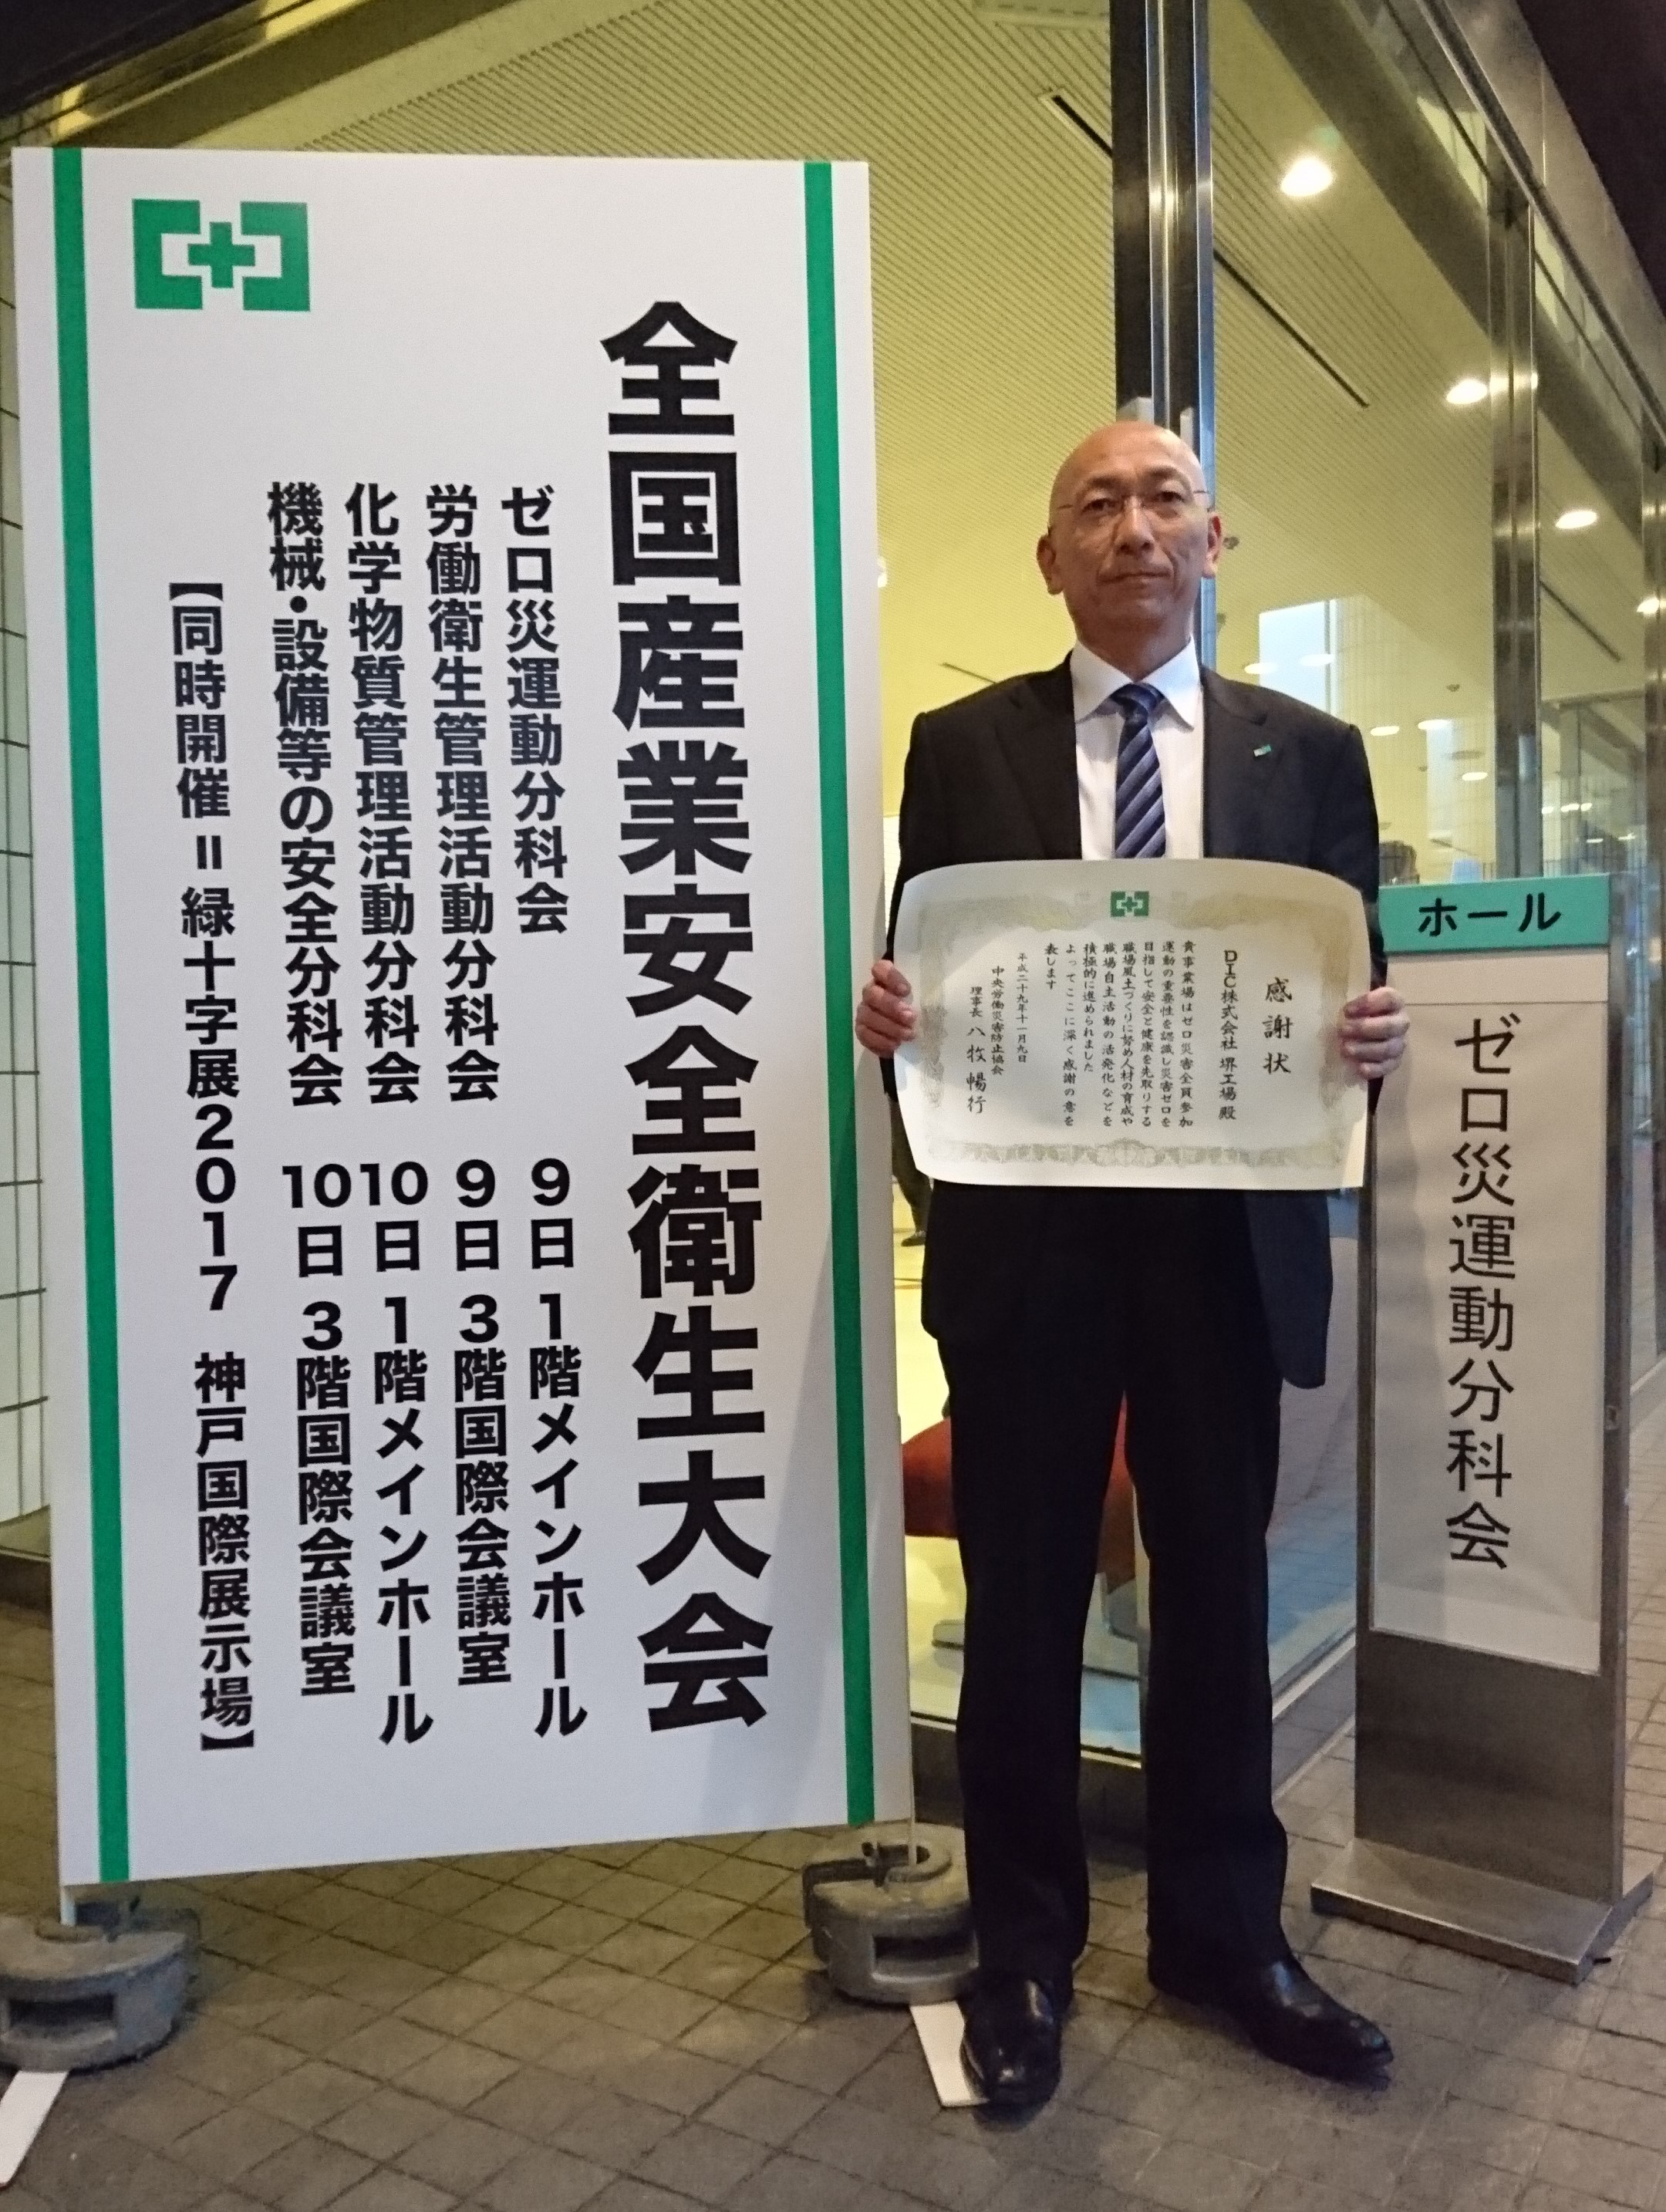 Takatoshi Ogawa, manager in charge of the Sakai Plant’s Safety and Environment Group